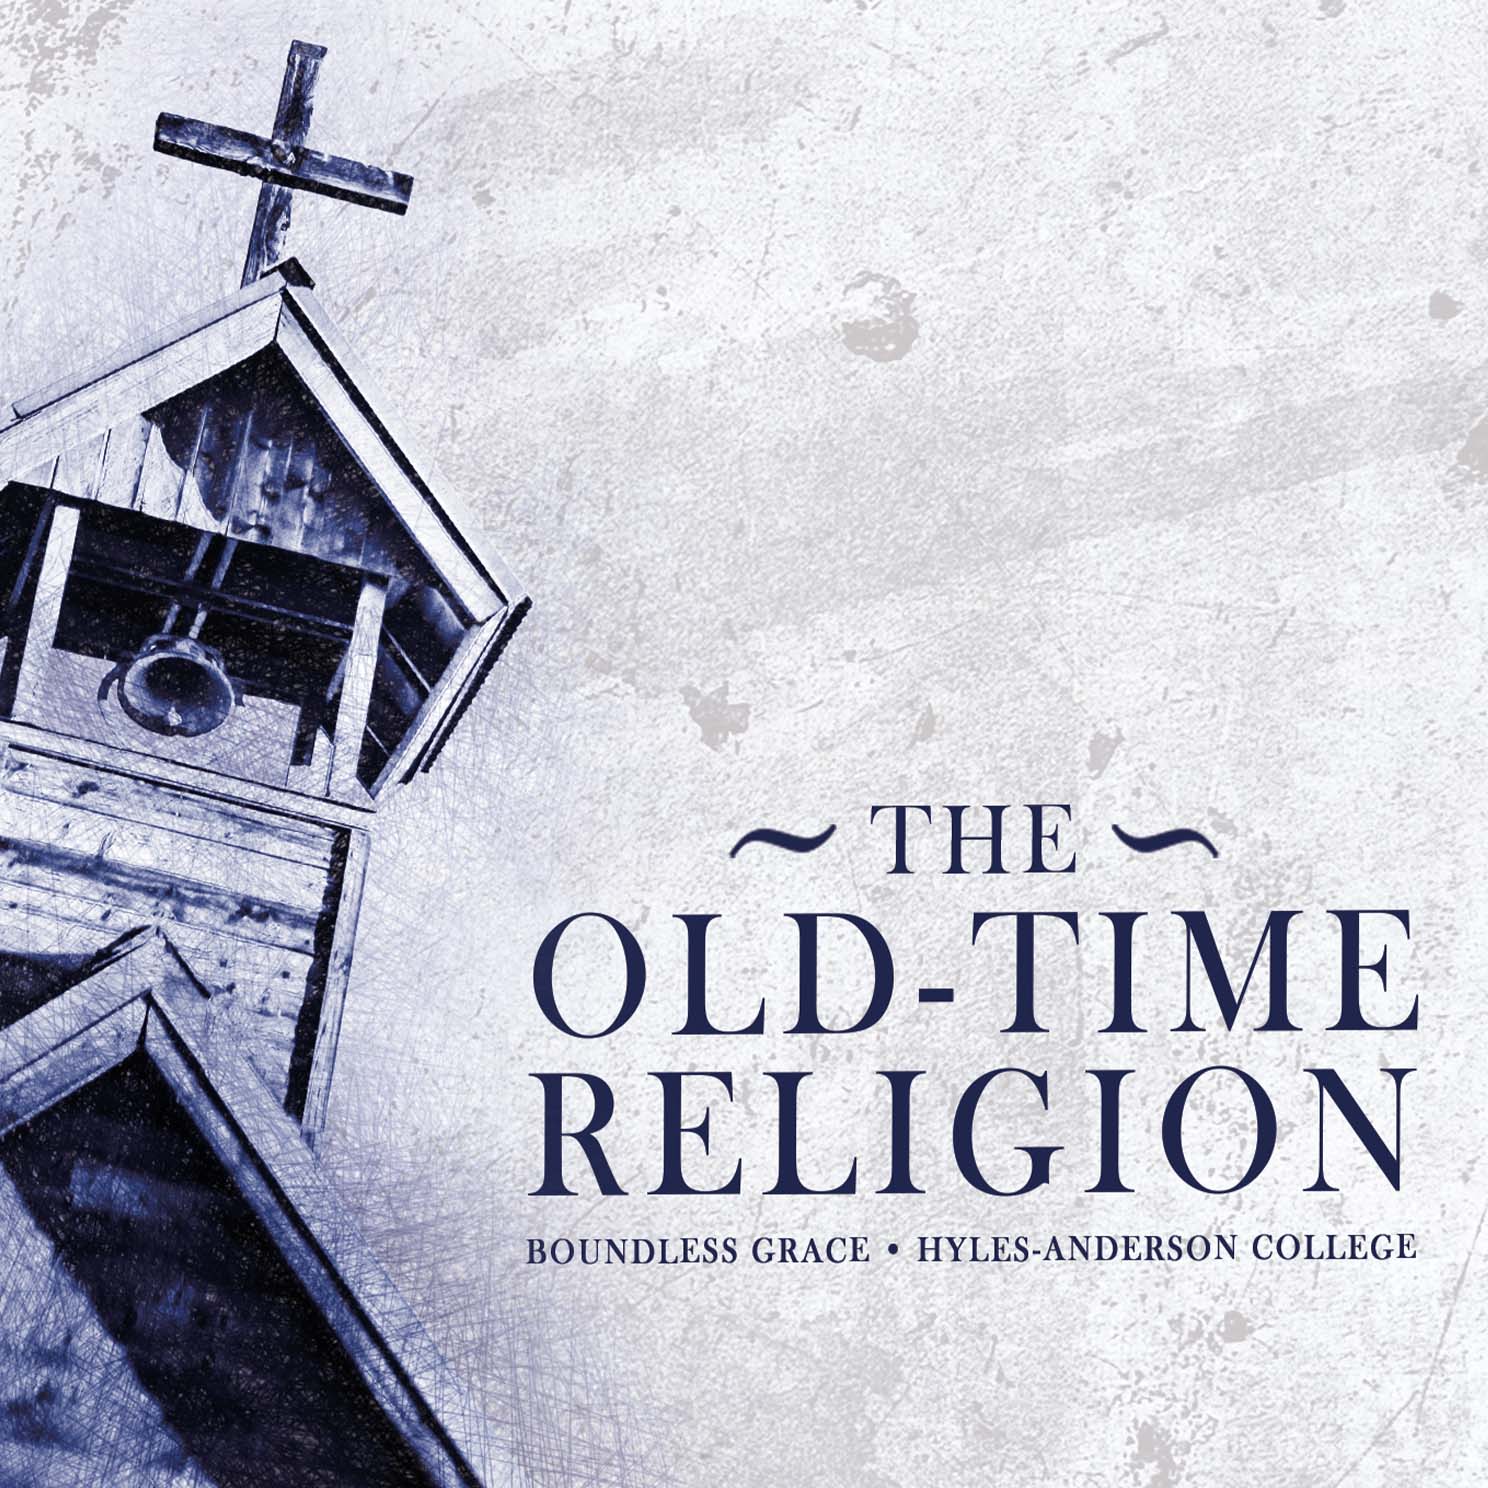 The Old-Time Religion